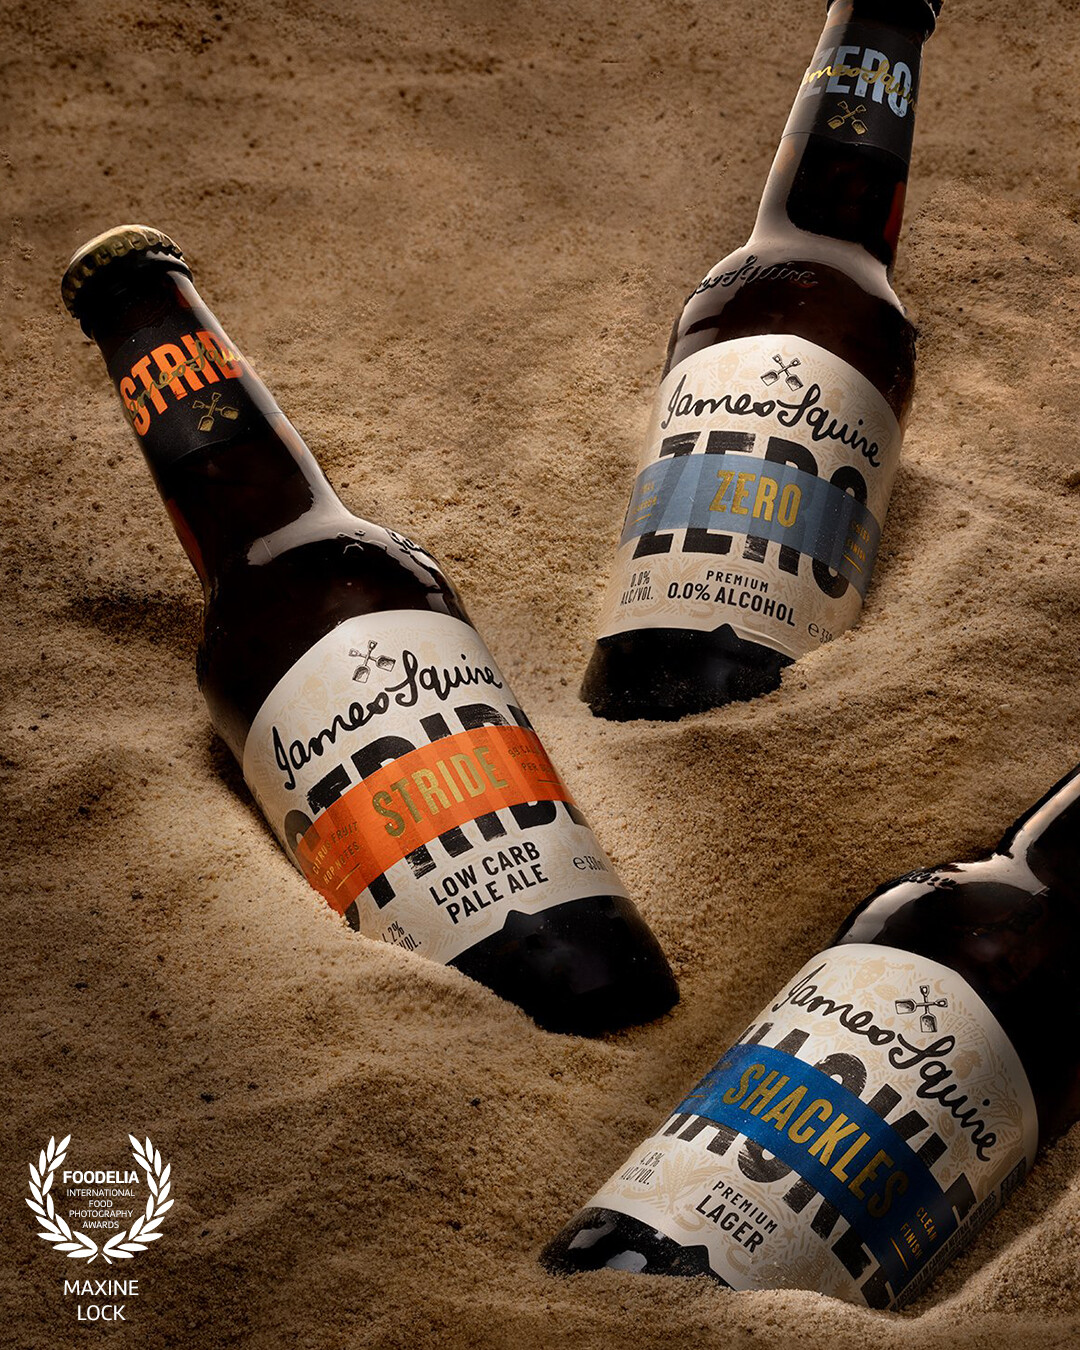 A selection of beers buried as treasures in the sand.